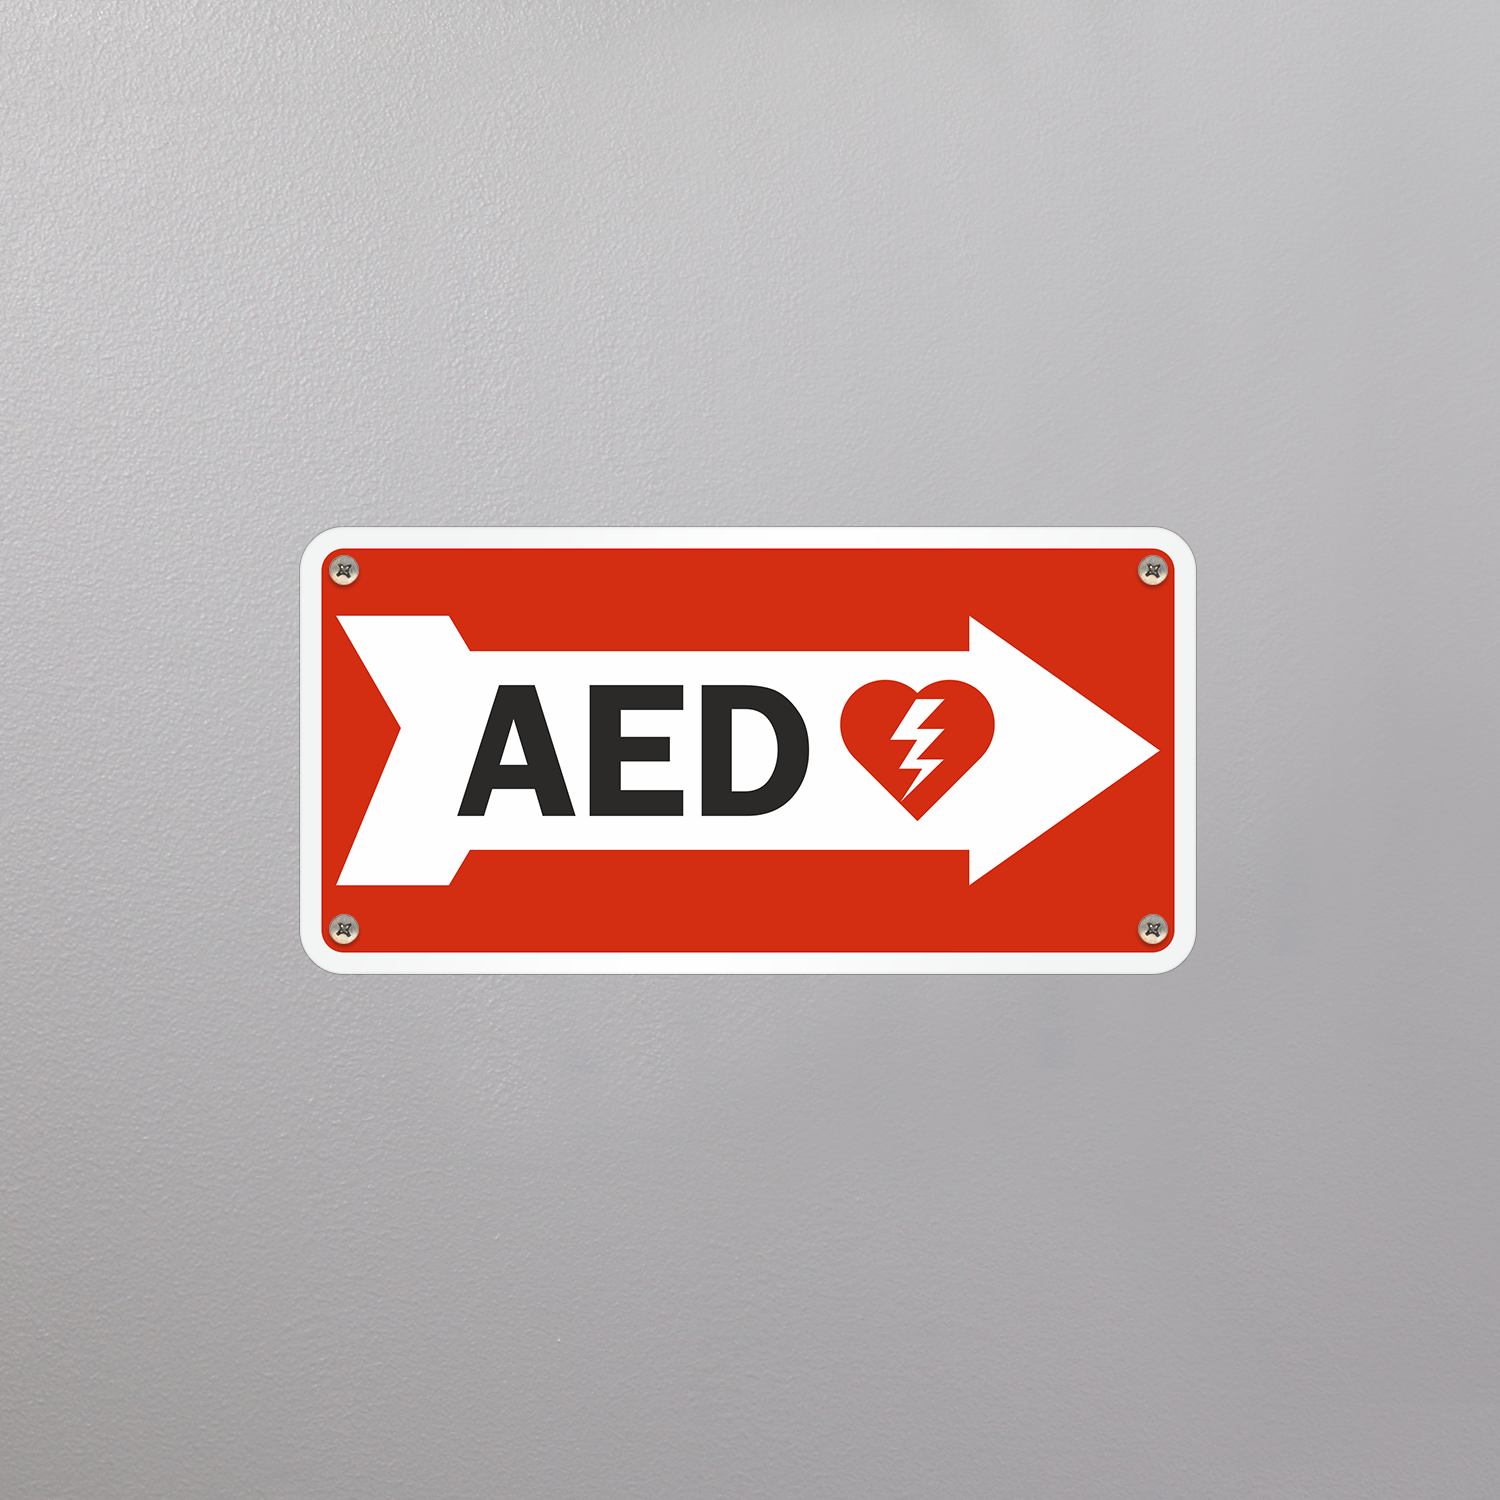 Right arrow indicator for AED placement